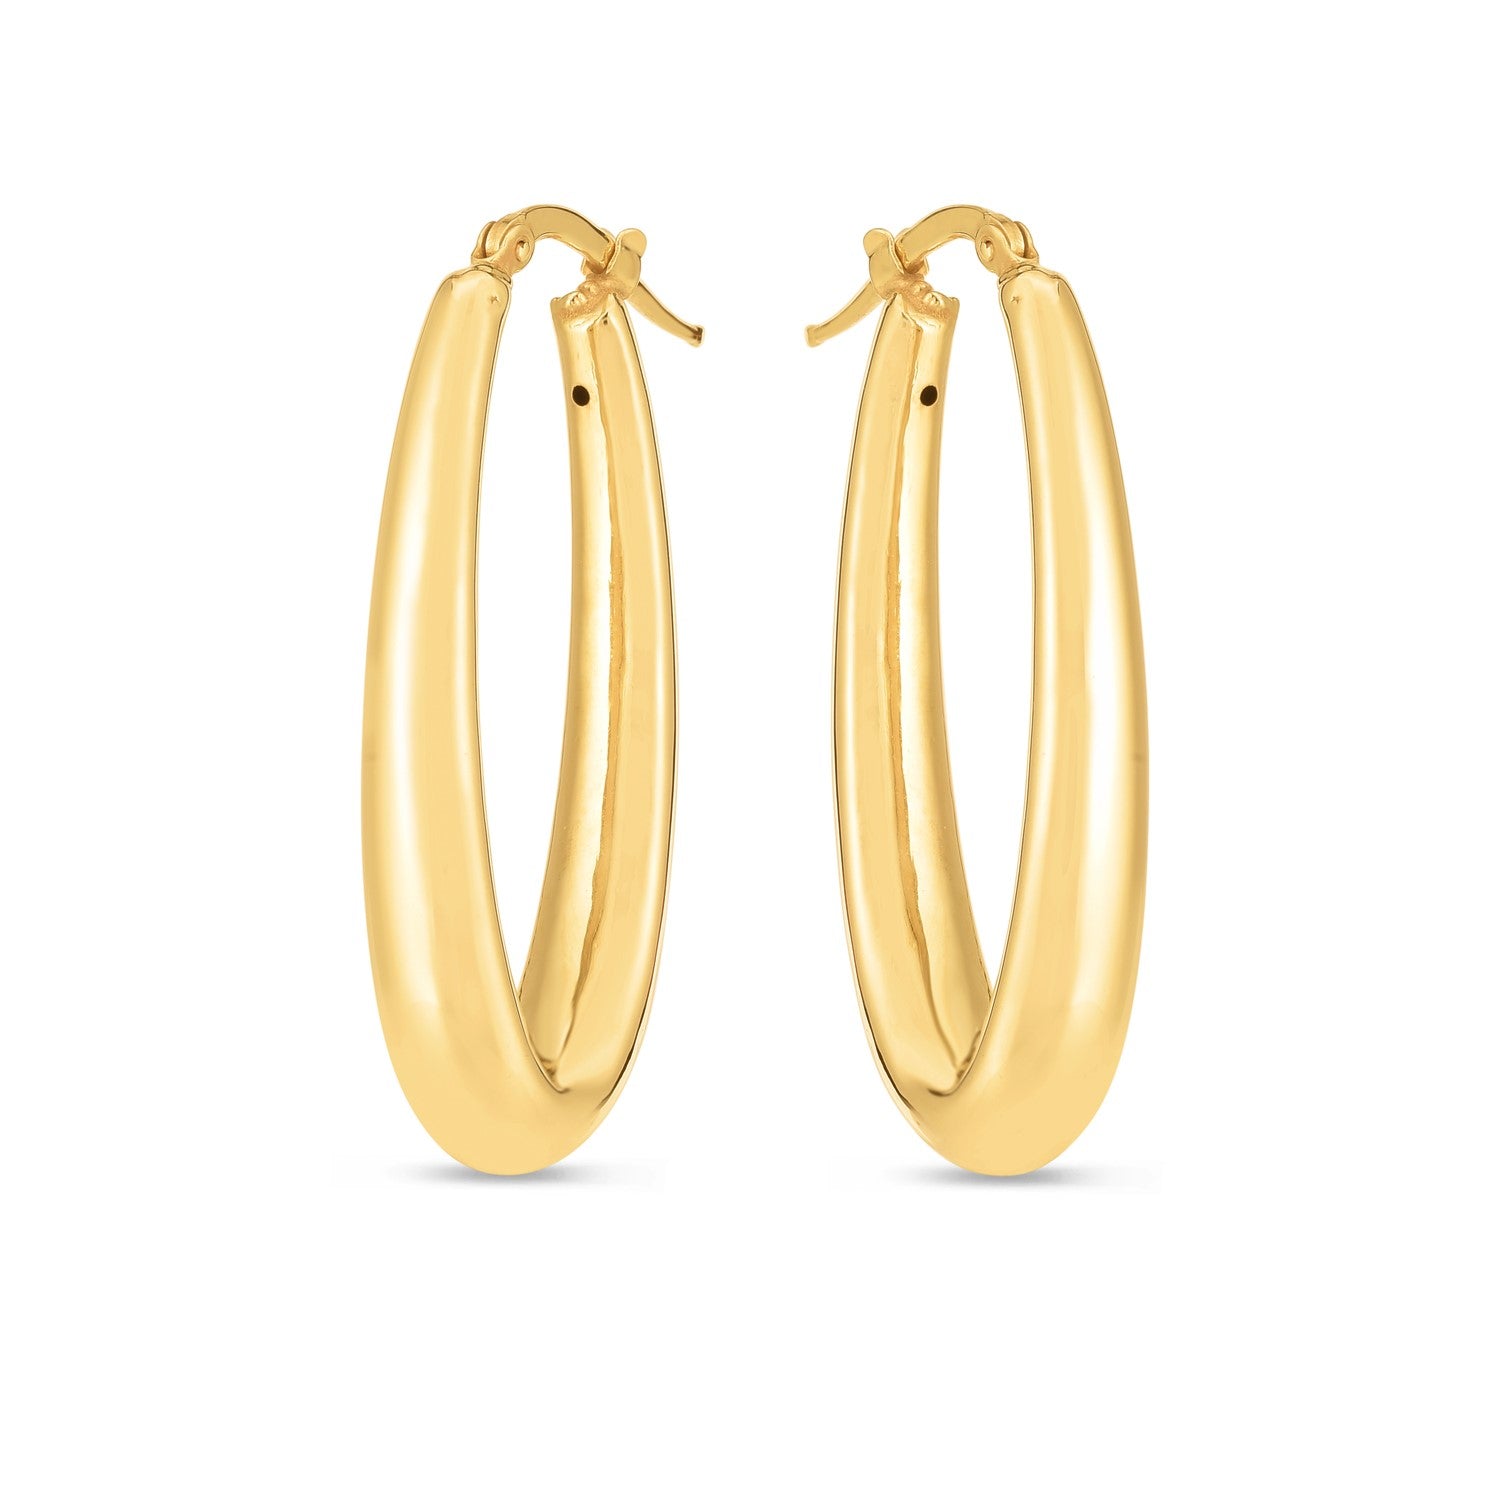 14k Yellow Gold Elongated Oval Hoops